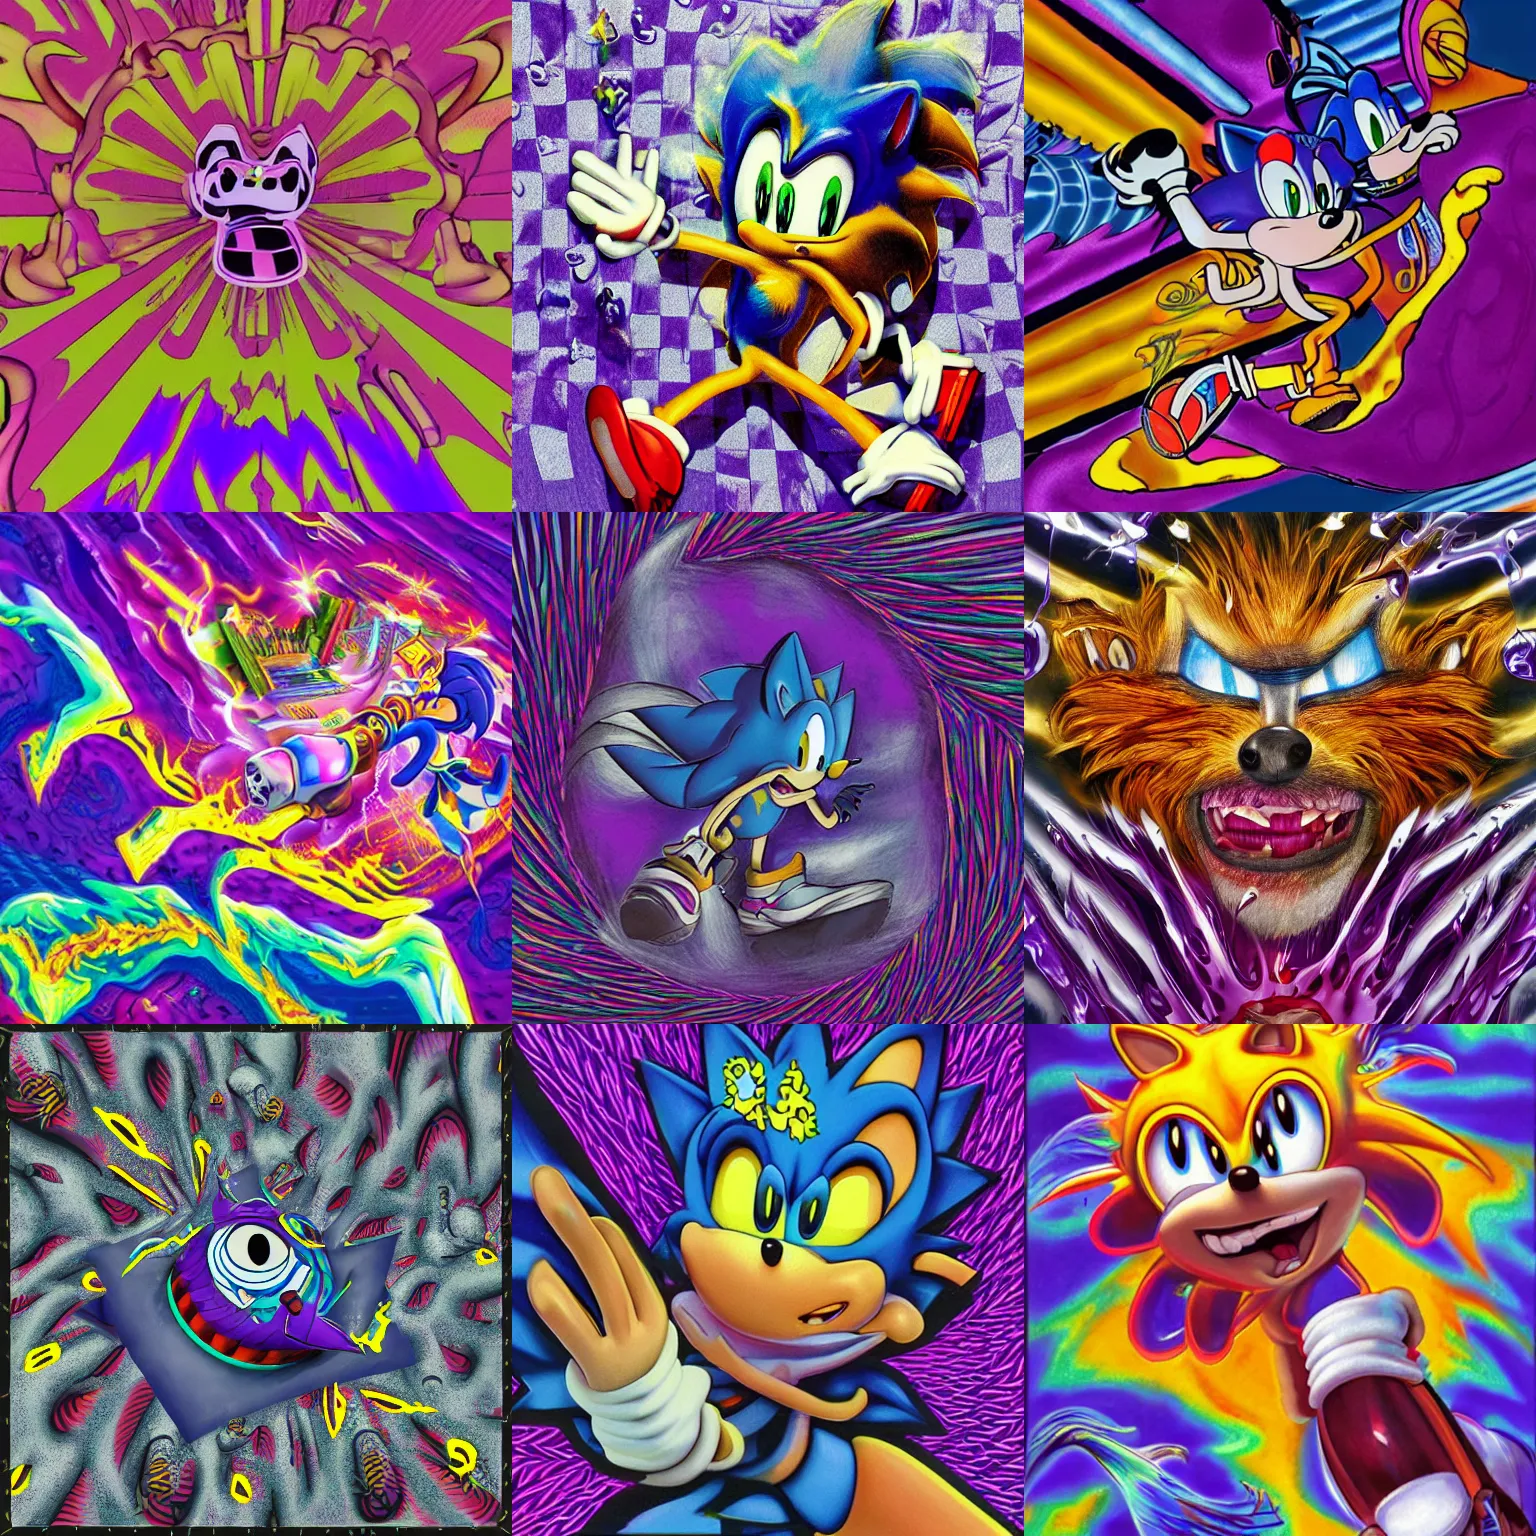 Prompt: surreal, faded, totally radical detailed professional, high quality airbrush art MGMT album cover of a liquid dissolving LSD DMT sonic the hedgehog on a flat purple checkerboard plane, 1990s 1992 prerendered graphics raytraced phong shaded album cover, in the style of John Kricfalusi